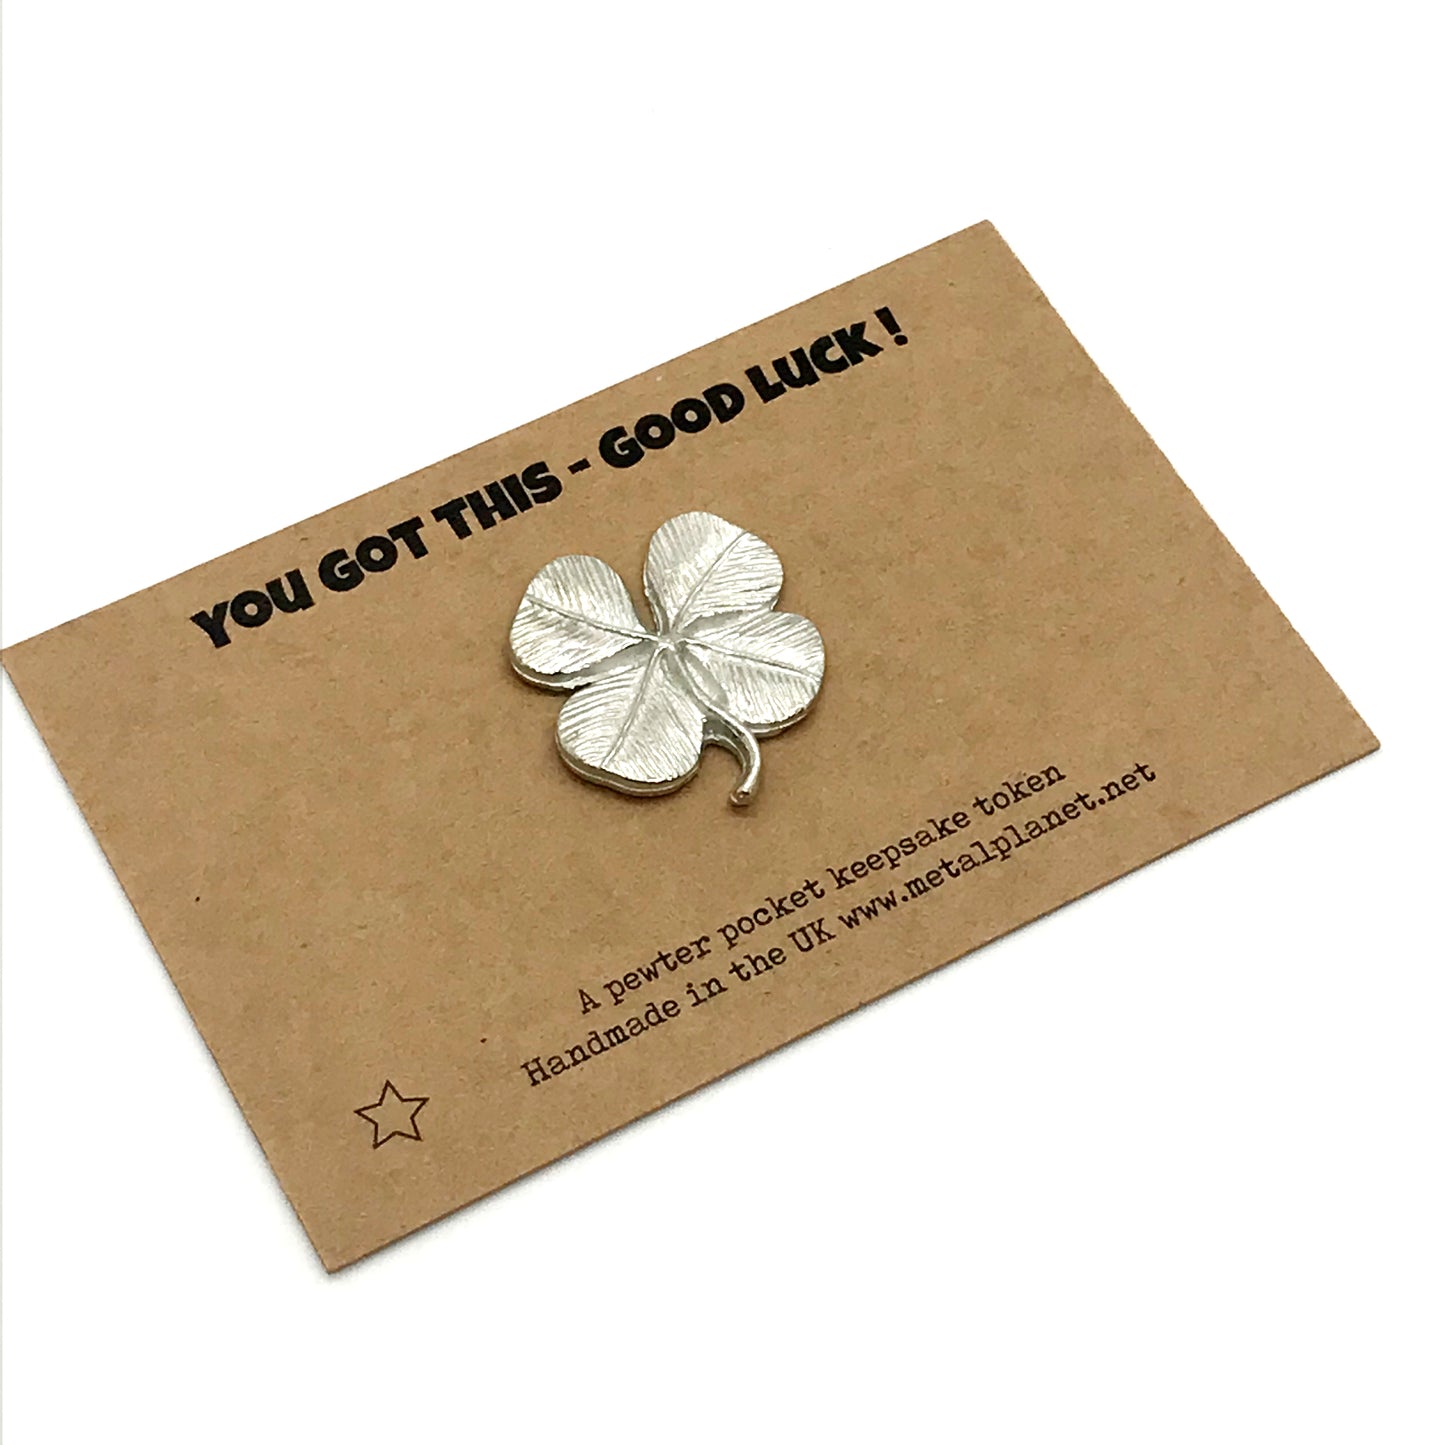 Good luck pocket token 'You got this - Lucky shamrock token' on double sided gift card